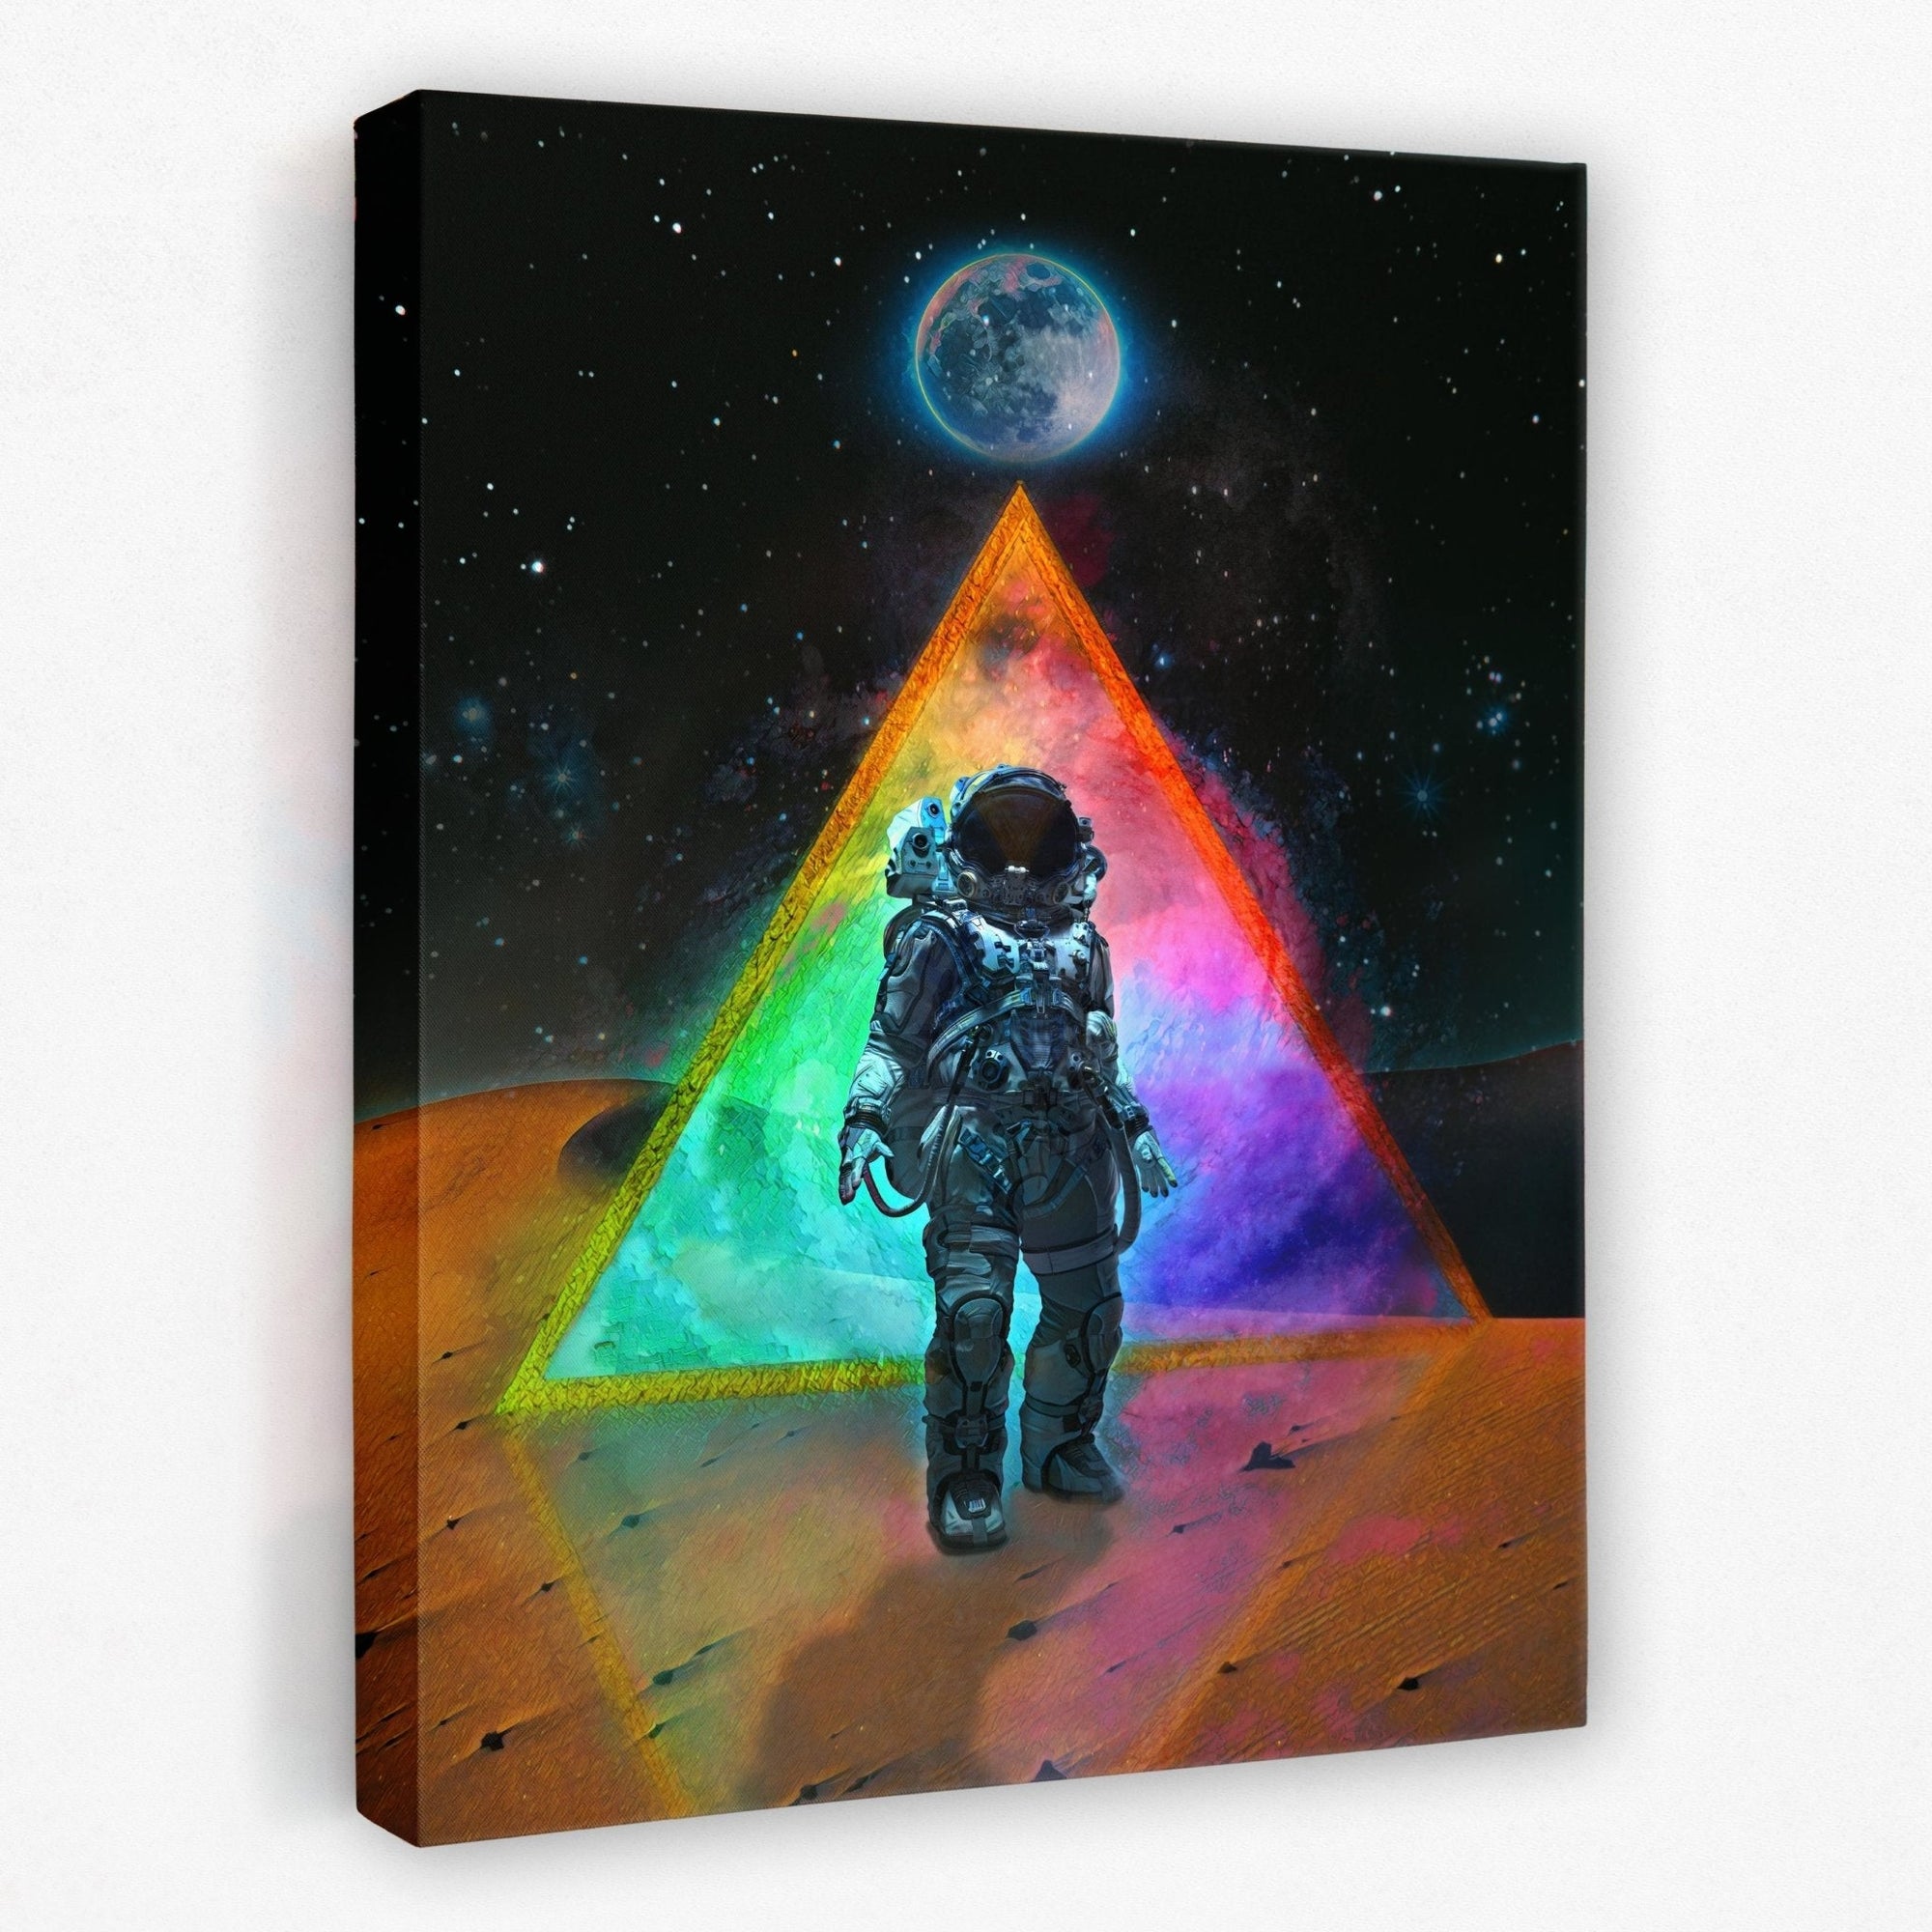 Man On Mars - Thedopeart Canvas